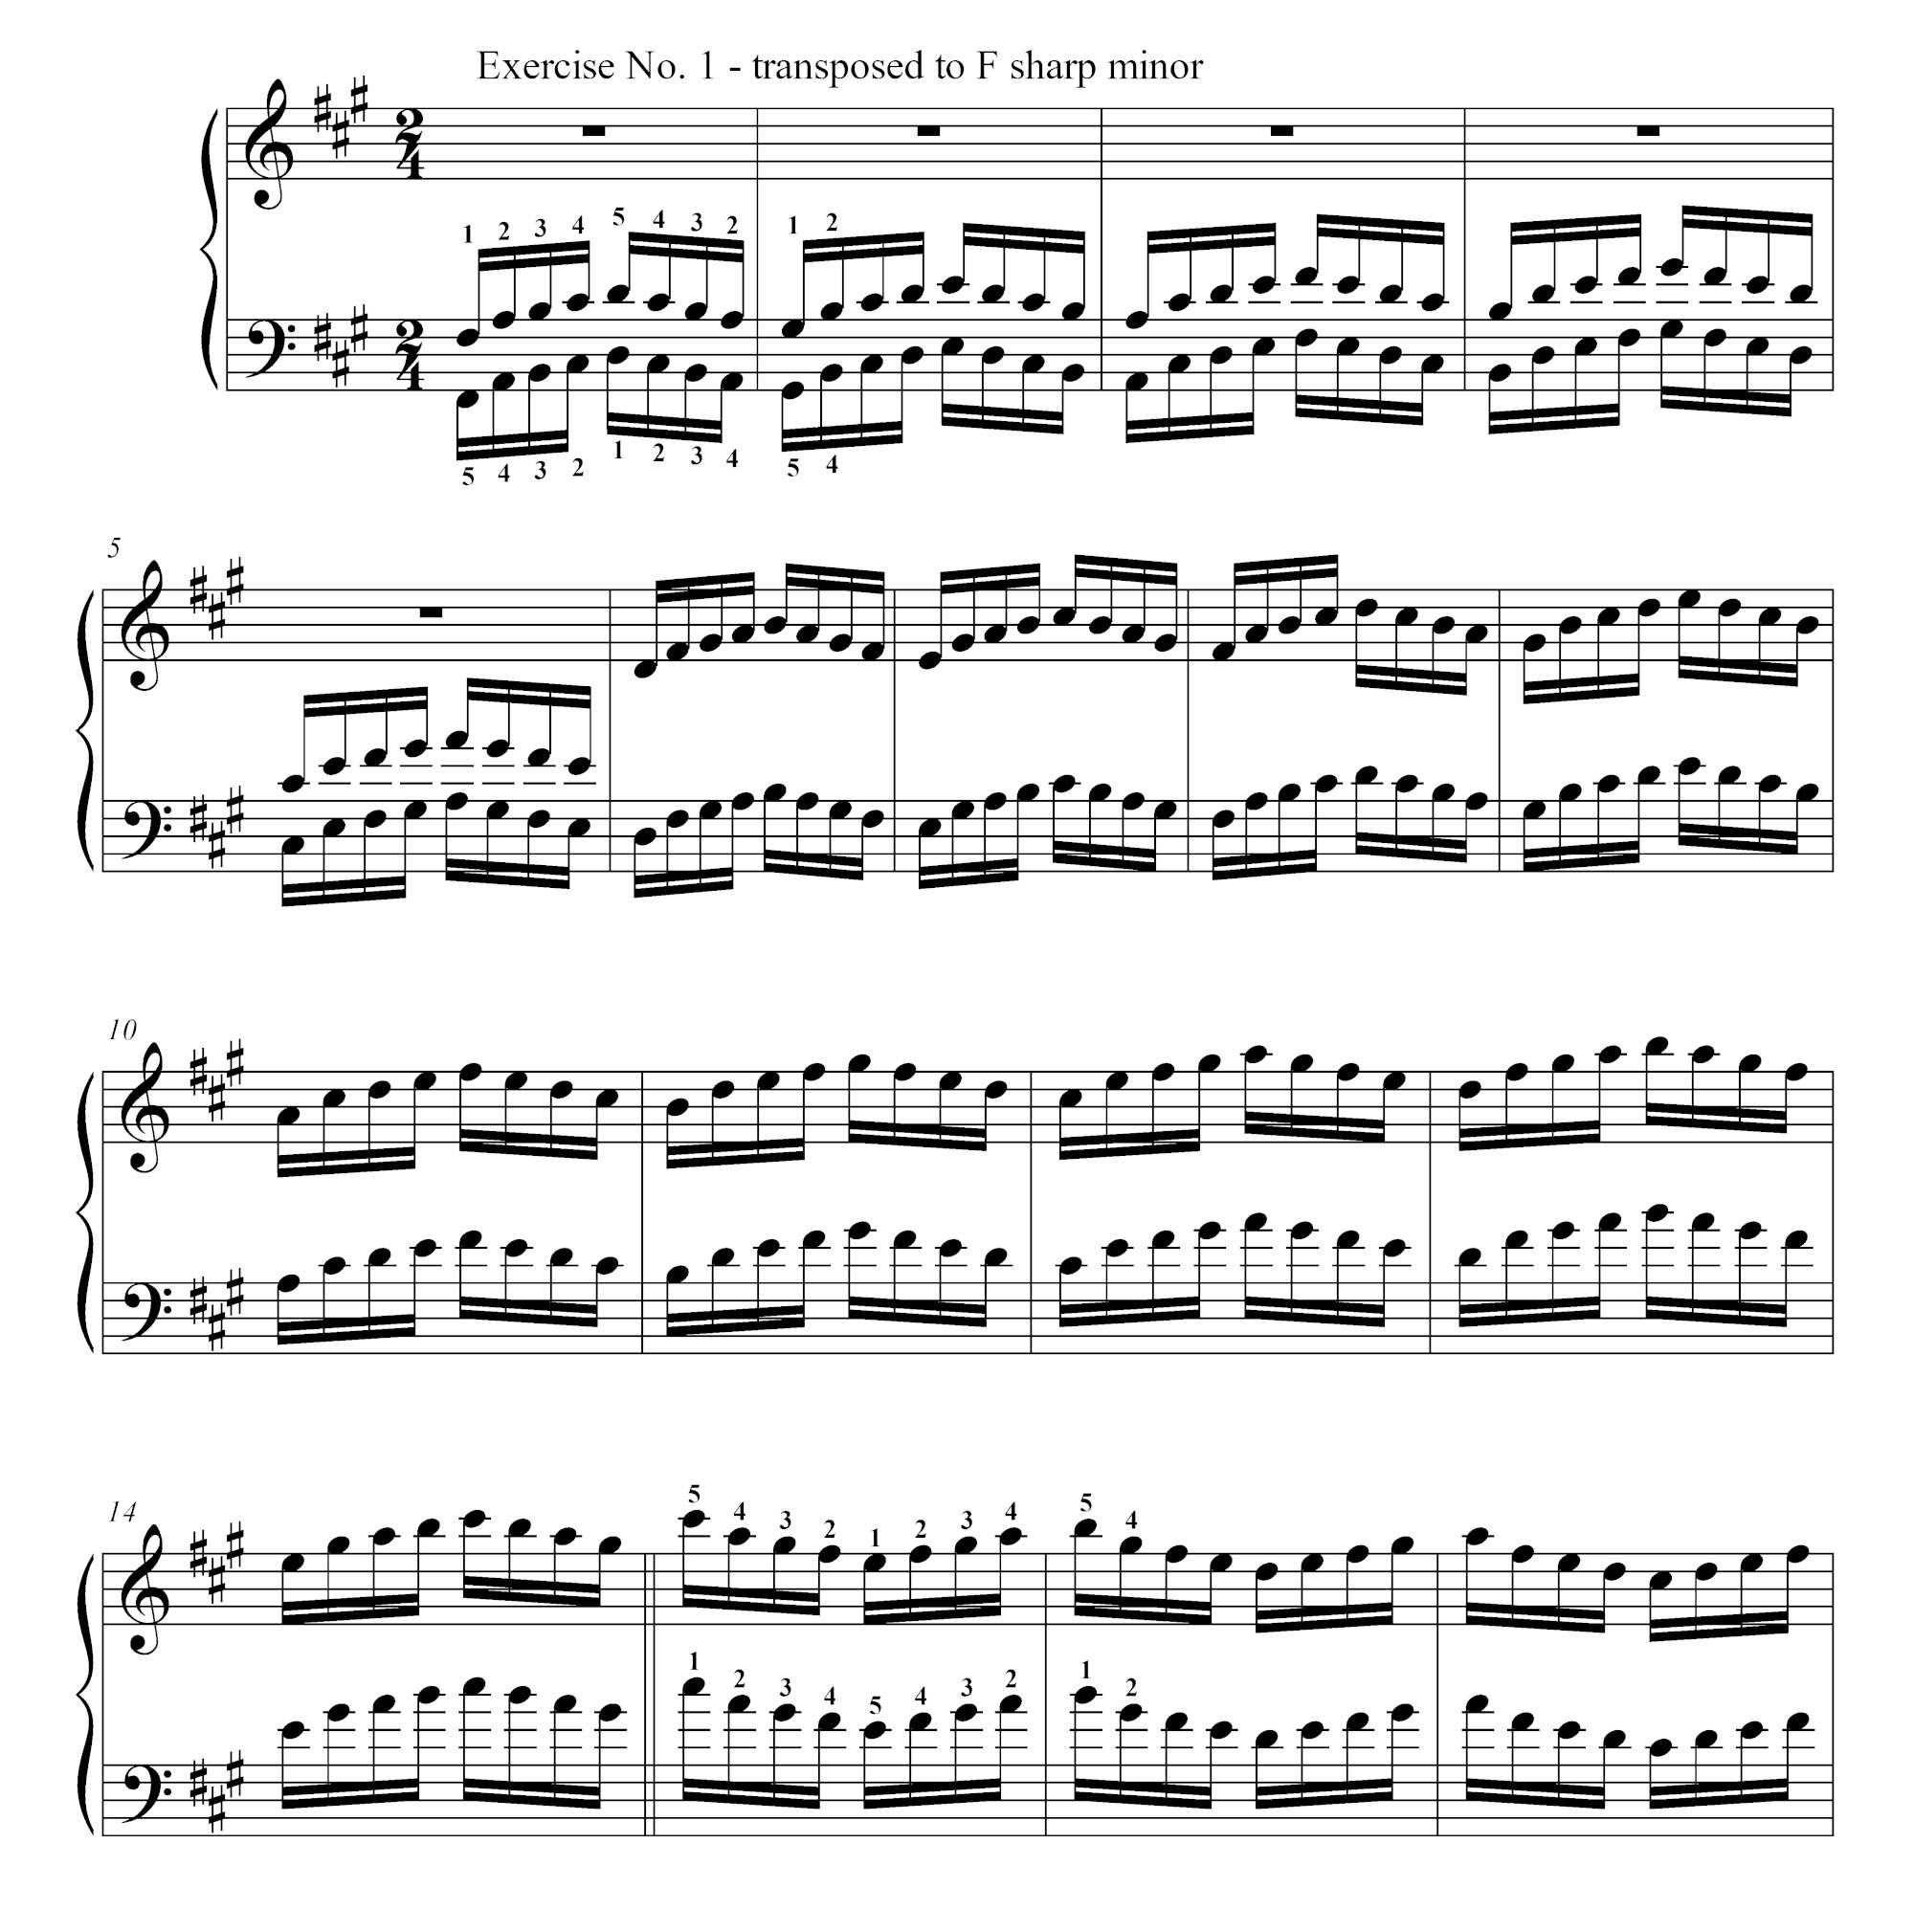 Hanon-Exercise-transposed-to-F-sharp-minor_Page1